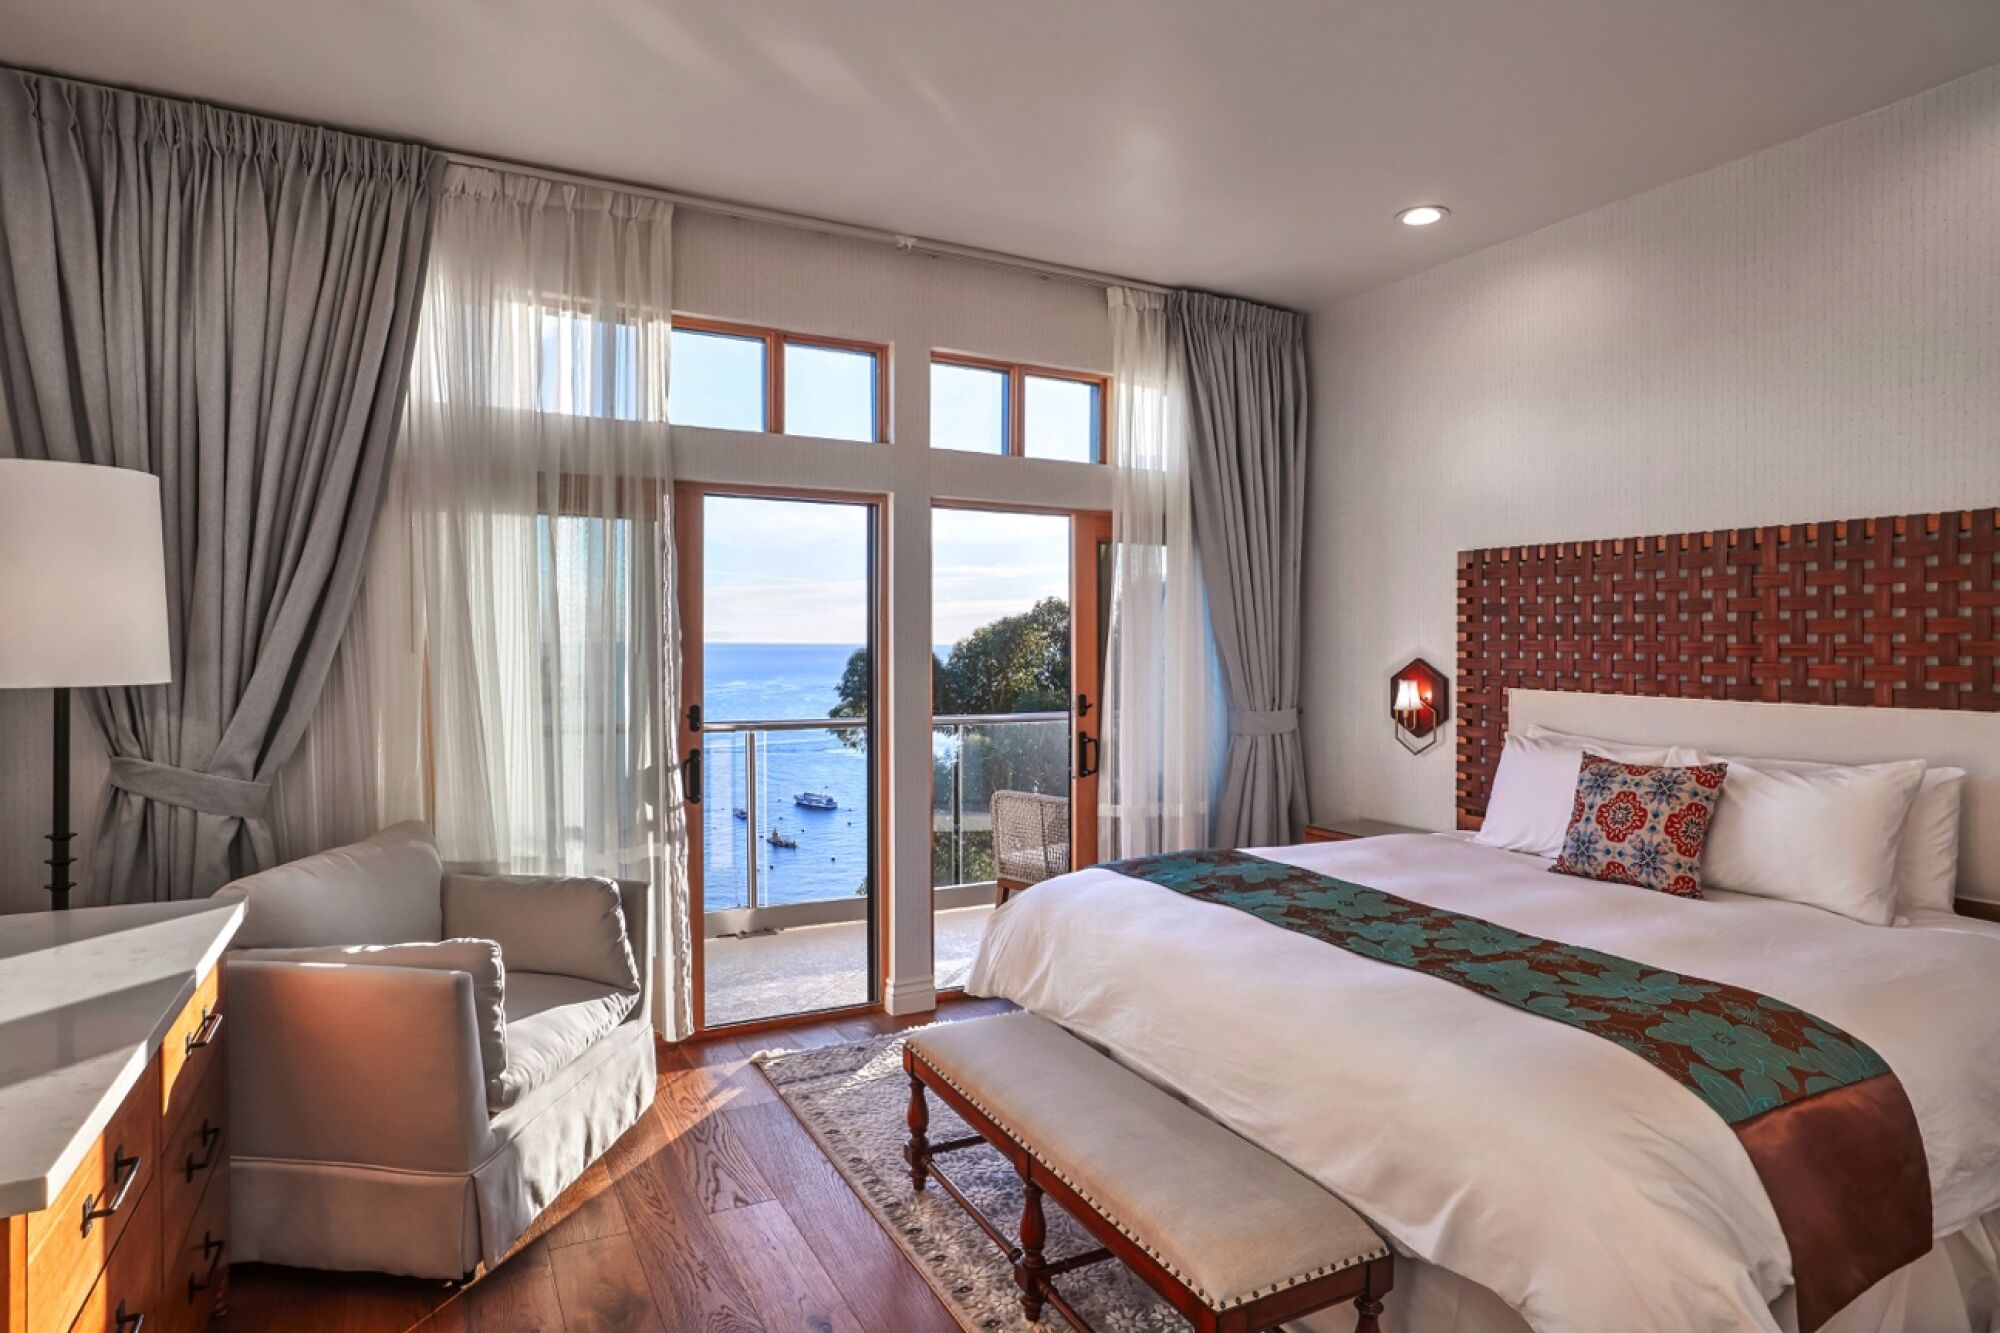 A spacious hotel room with wood floors and a view of the ocean